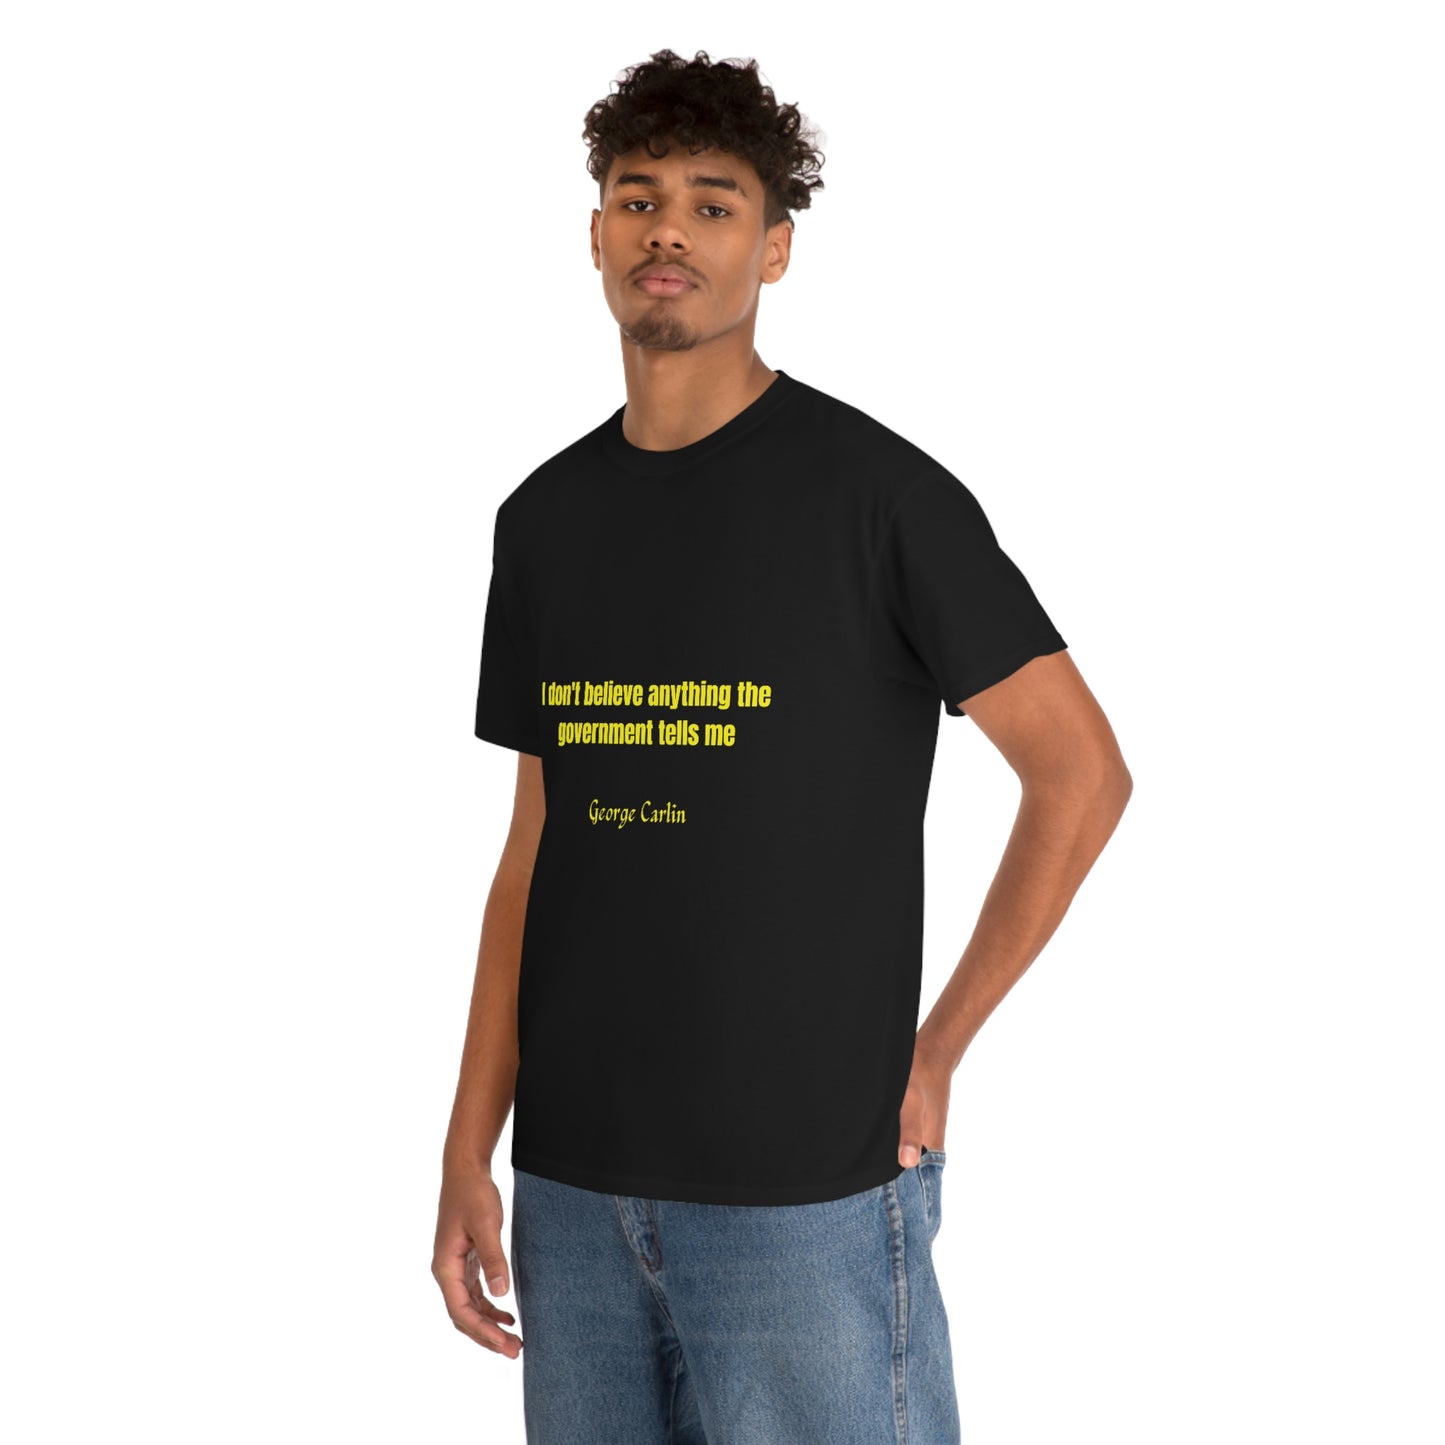 "I don't believe anything the government tells me" George Carlin Shirt